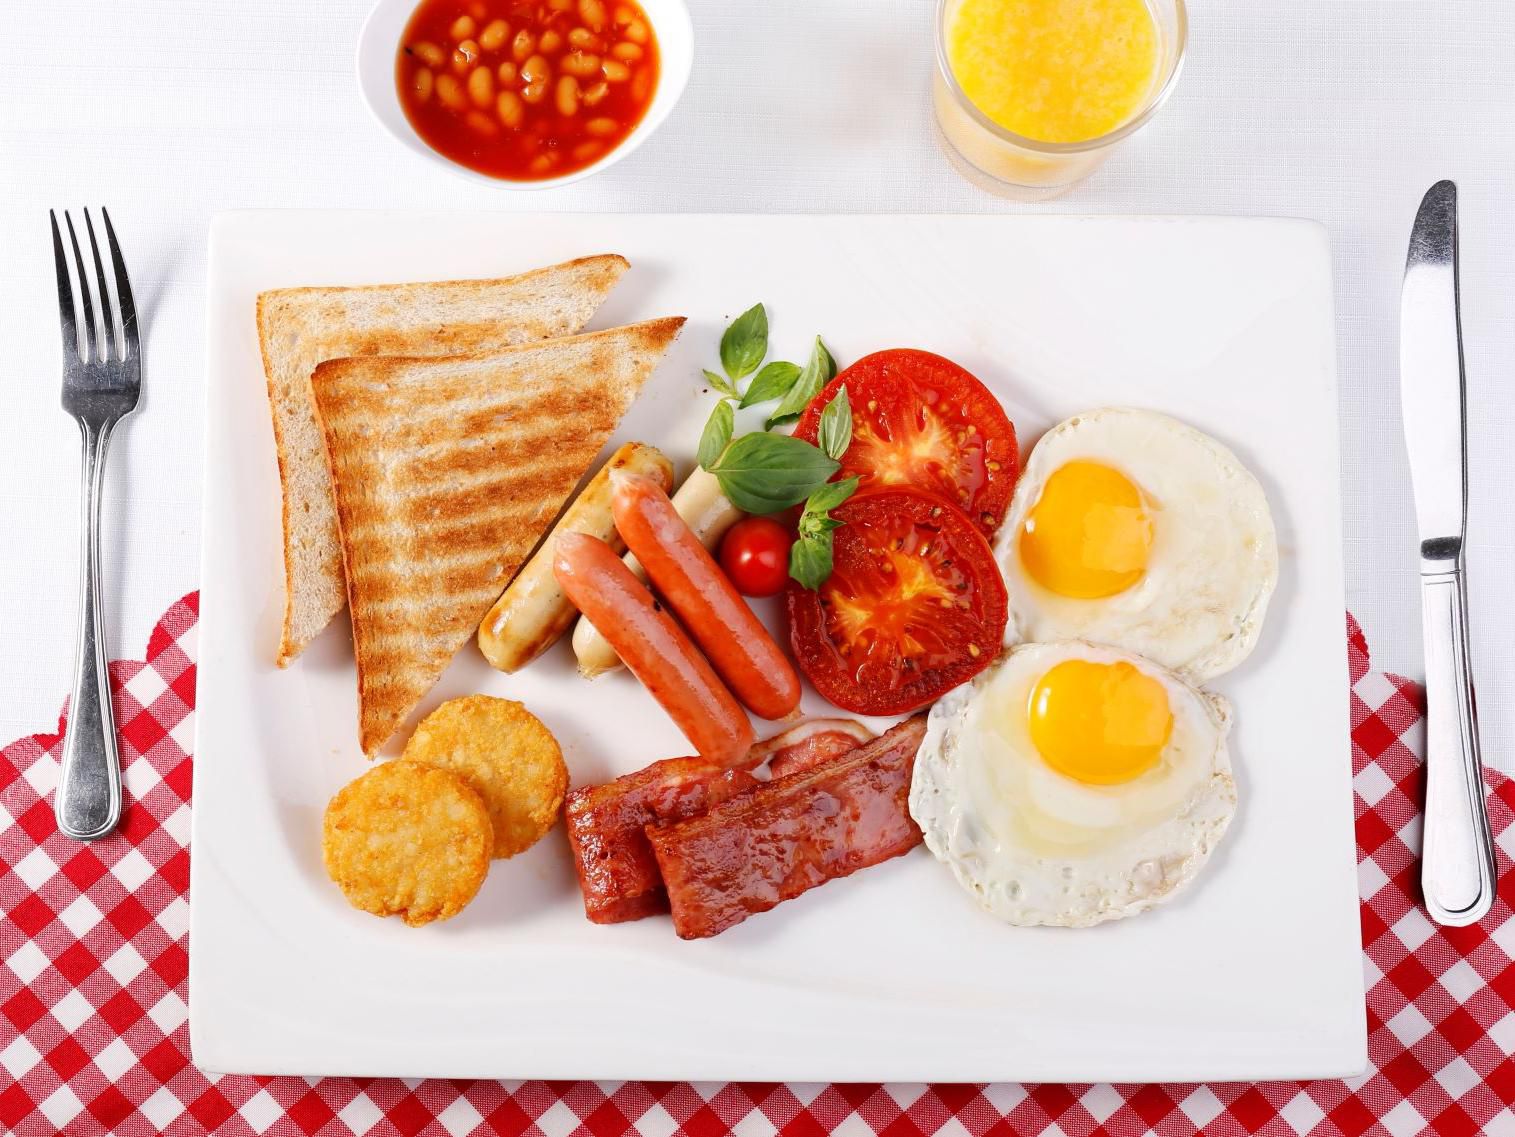 Enjoy your breakfast with RMB 1